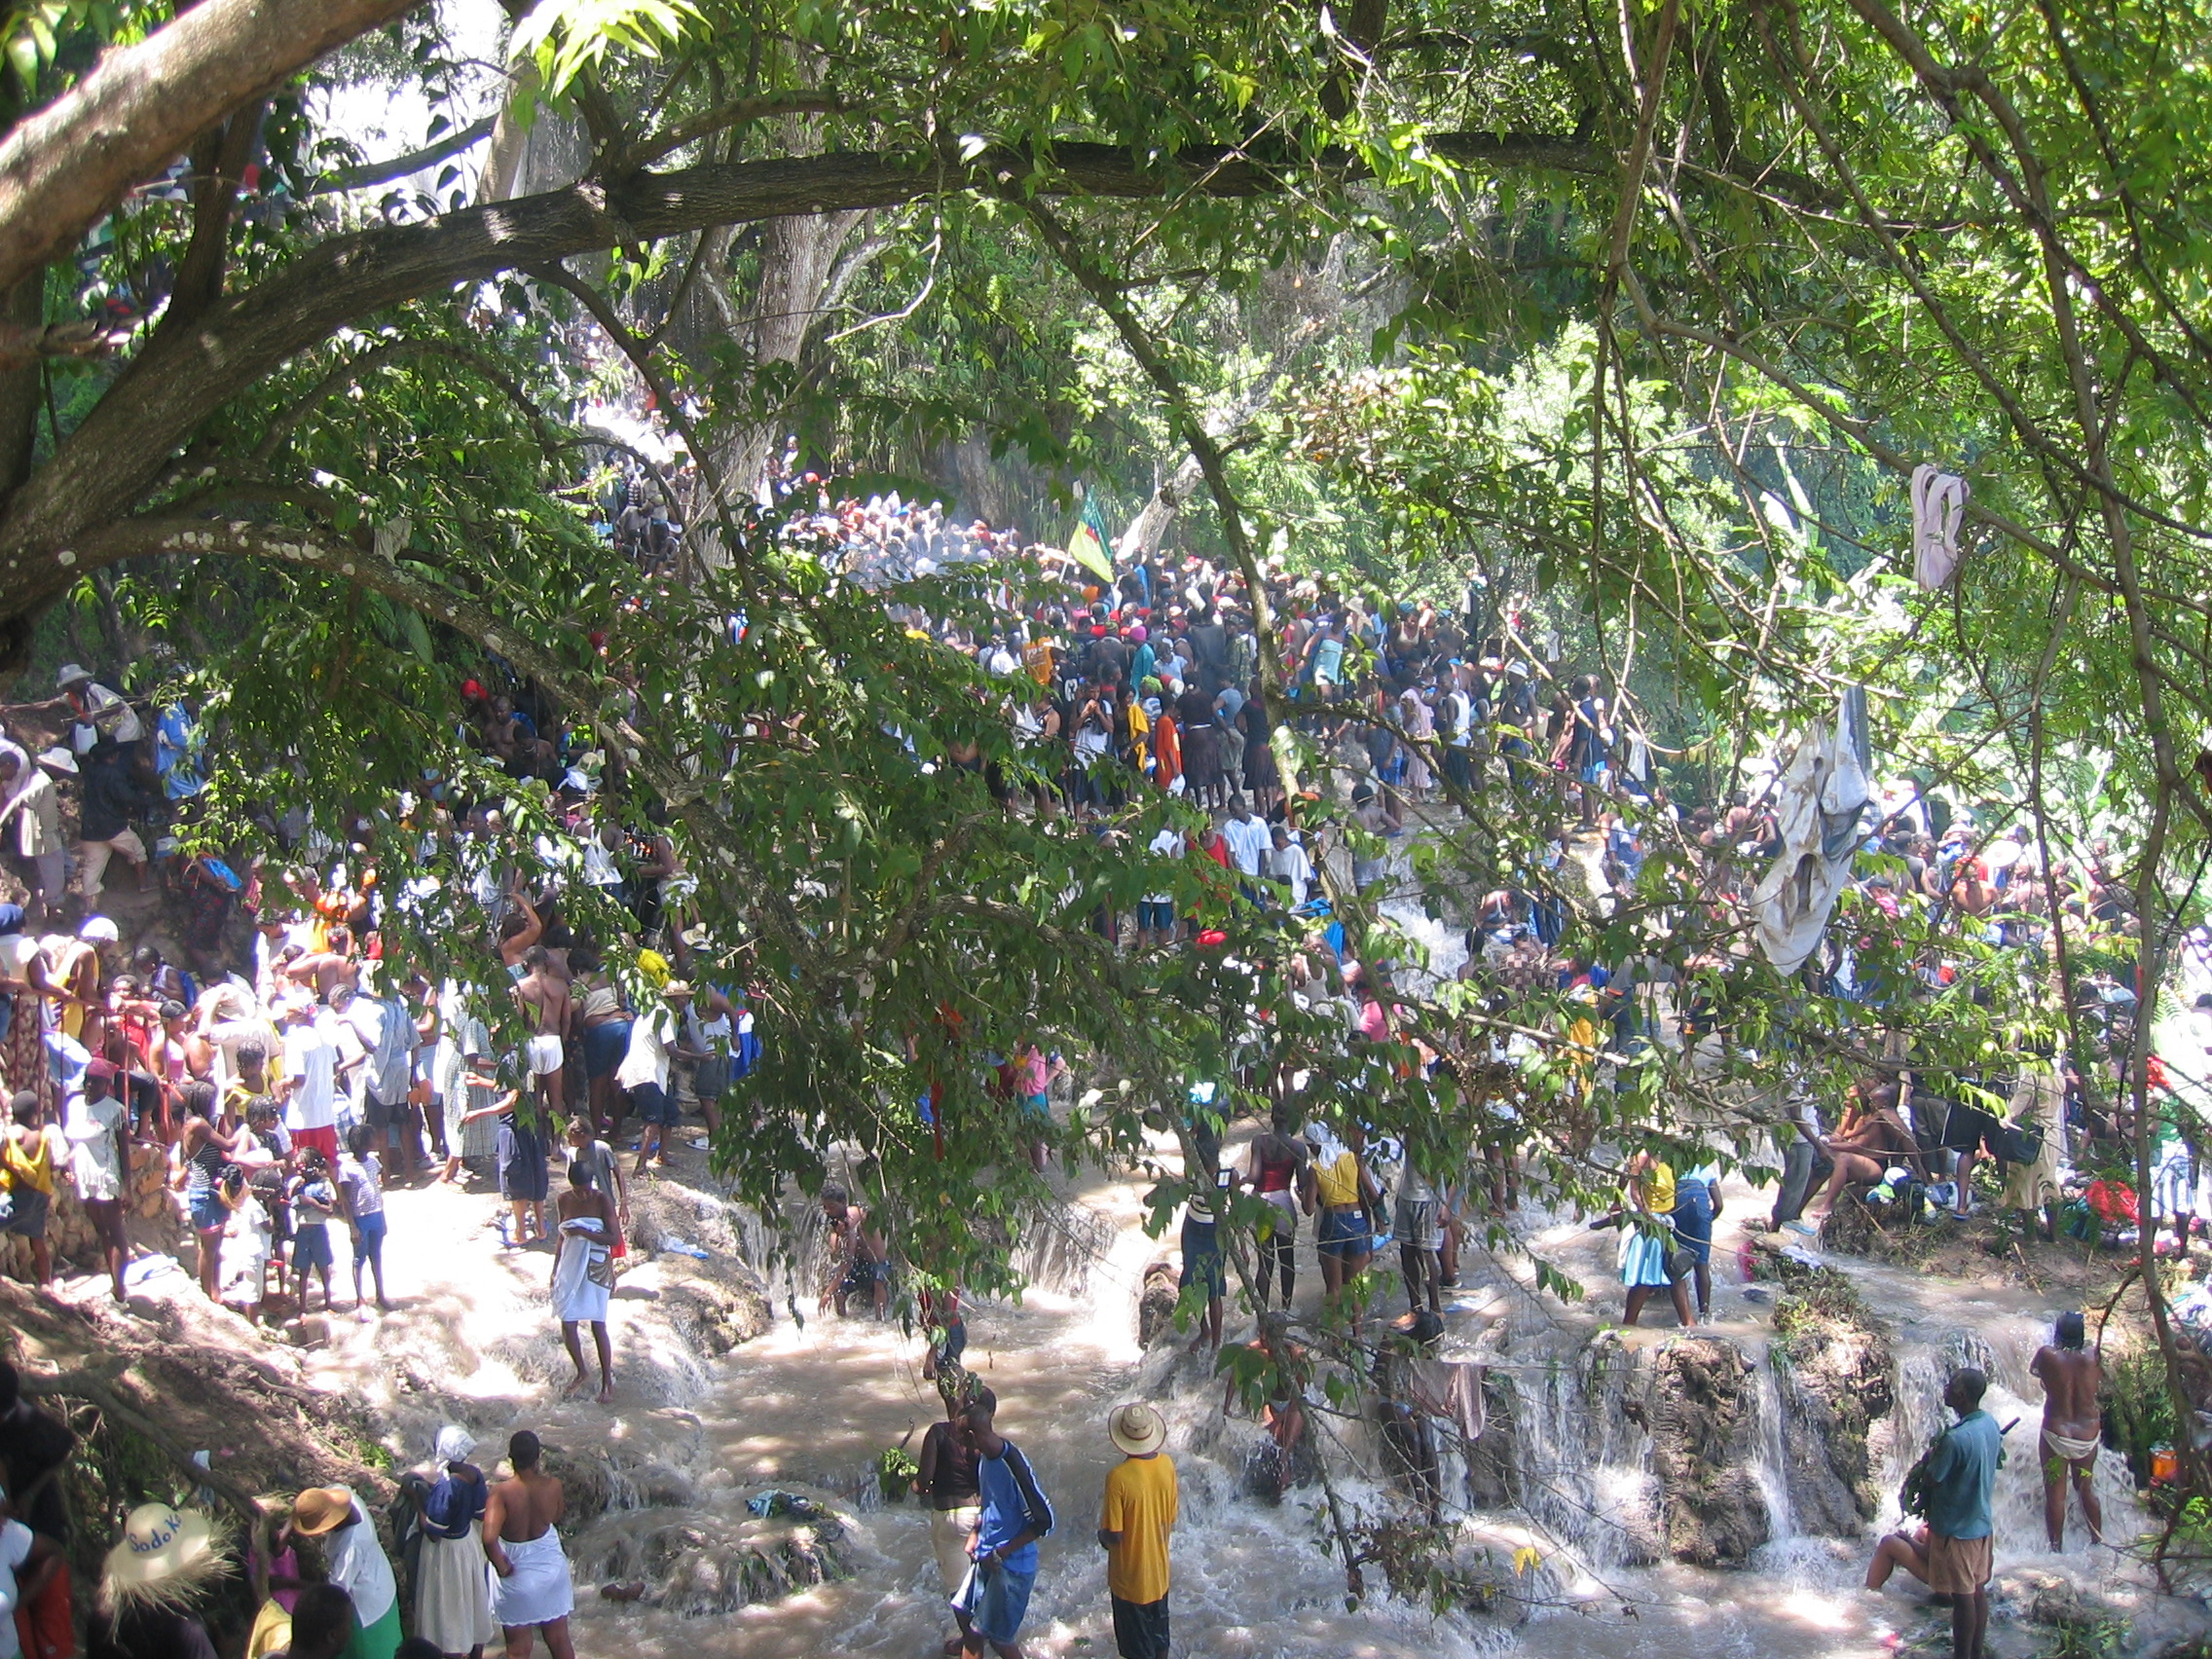  The masses of people in the sacred falls. 